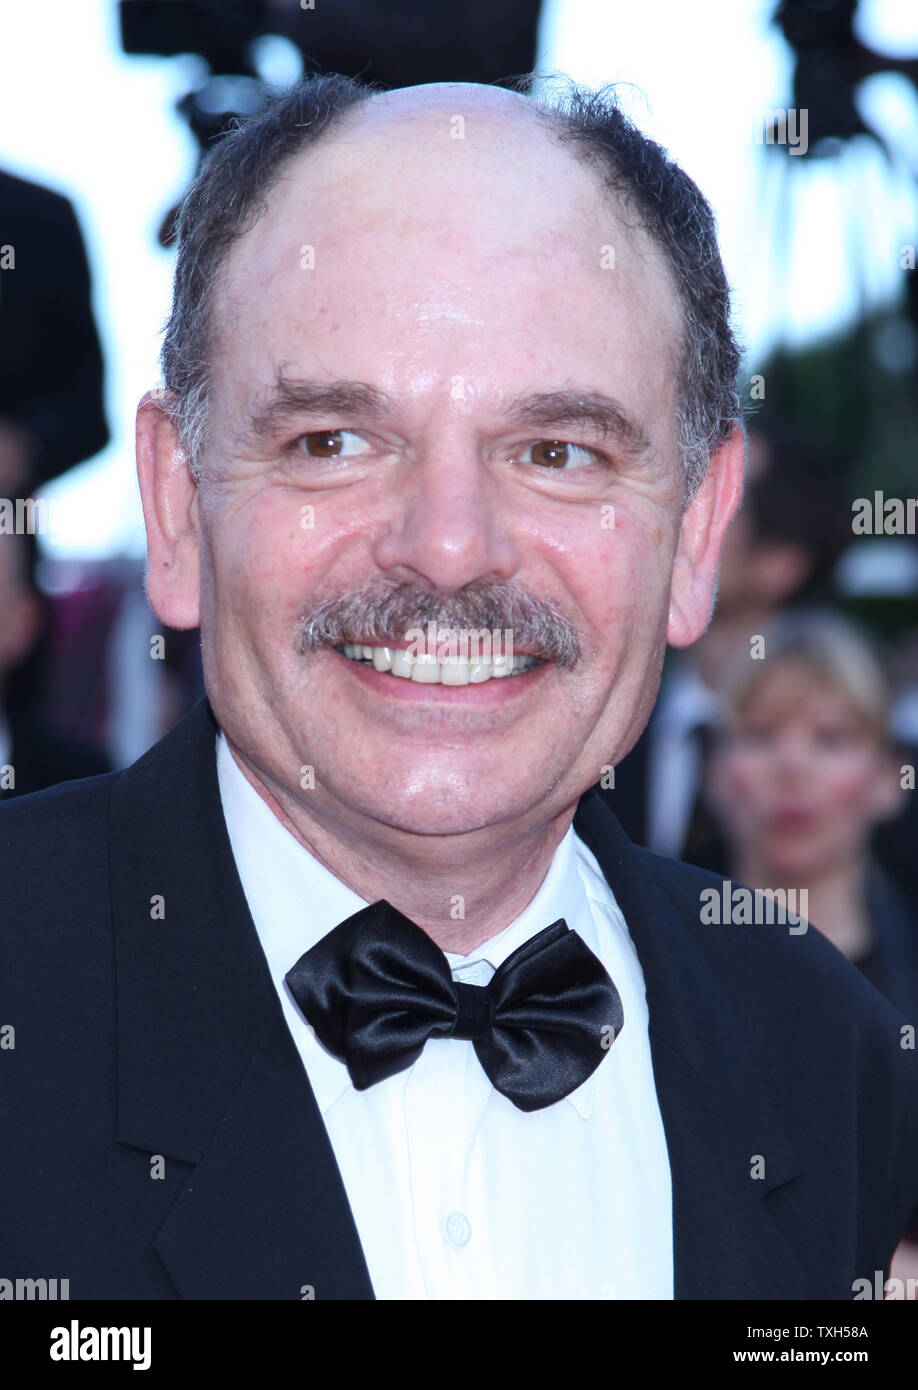 Jean-Pierre Darroussin arrives on the red carpet before the screening of the film 'Utomlyonnye Solntsem 2 (The Exodus - Burnt By The Sun 2)' during the 63rd annual Cannes International Film Festival in Cannes, France on May 22, 2010.  UPI/David Silpa Stock Photo